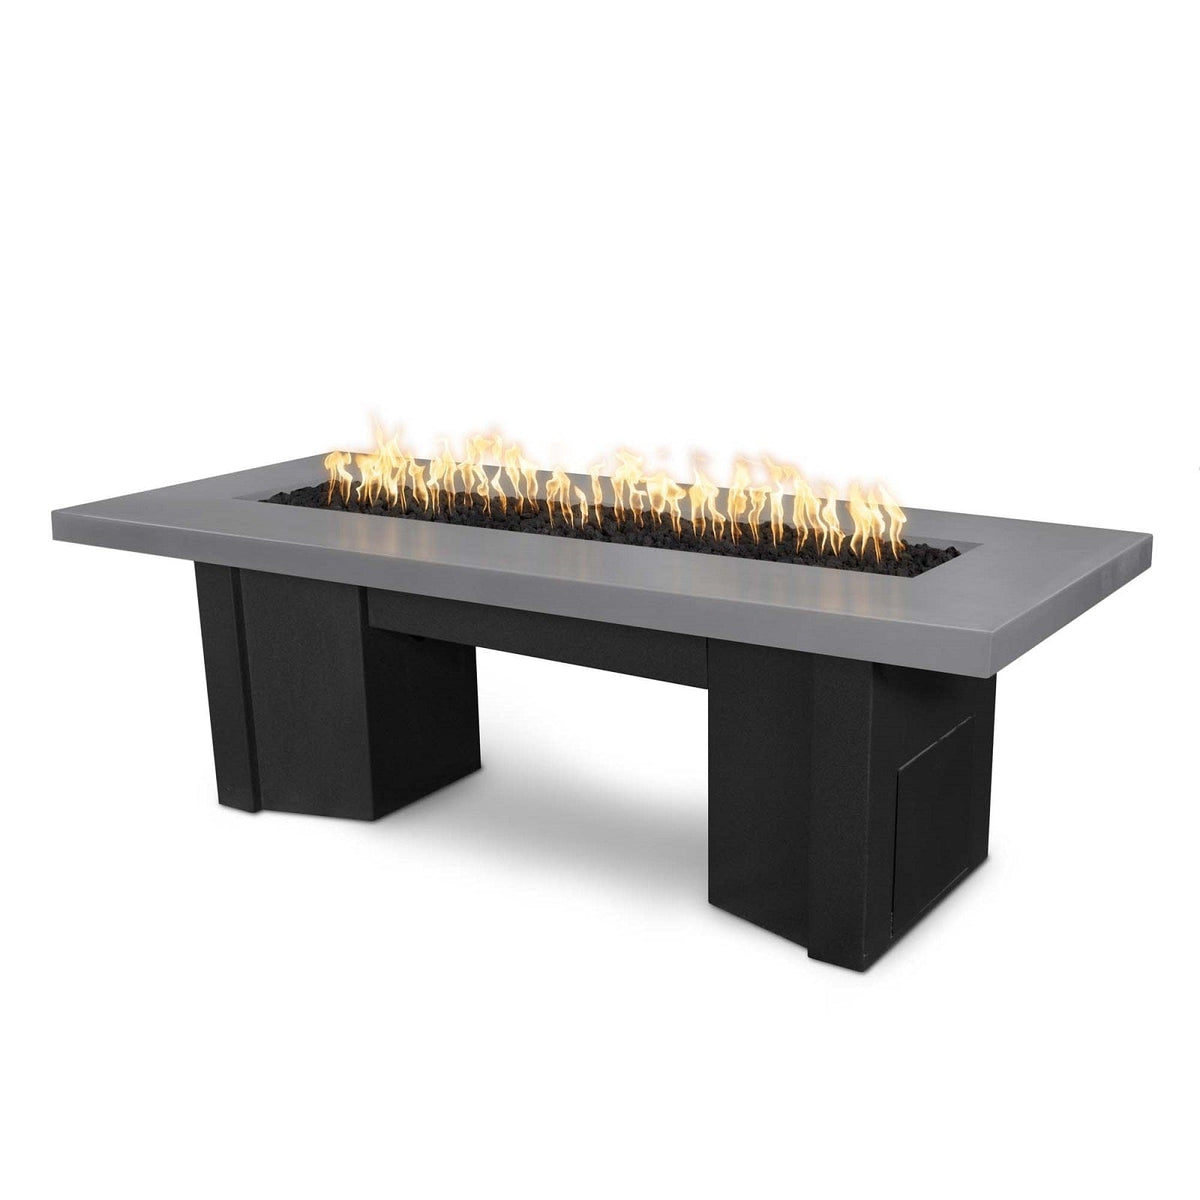 The Outdoor Plus Fire Features Natural Gray (-NGY) / Black Powder Coated Steel (-BLK) The Outdoor Plus 78&quot; Alameda Fire Table Smooth Concrete in Liquid Propane - 110V Plug &amp; Play Electronic Ignition / OPT-ALMGFRC78EKIT-LP